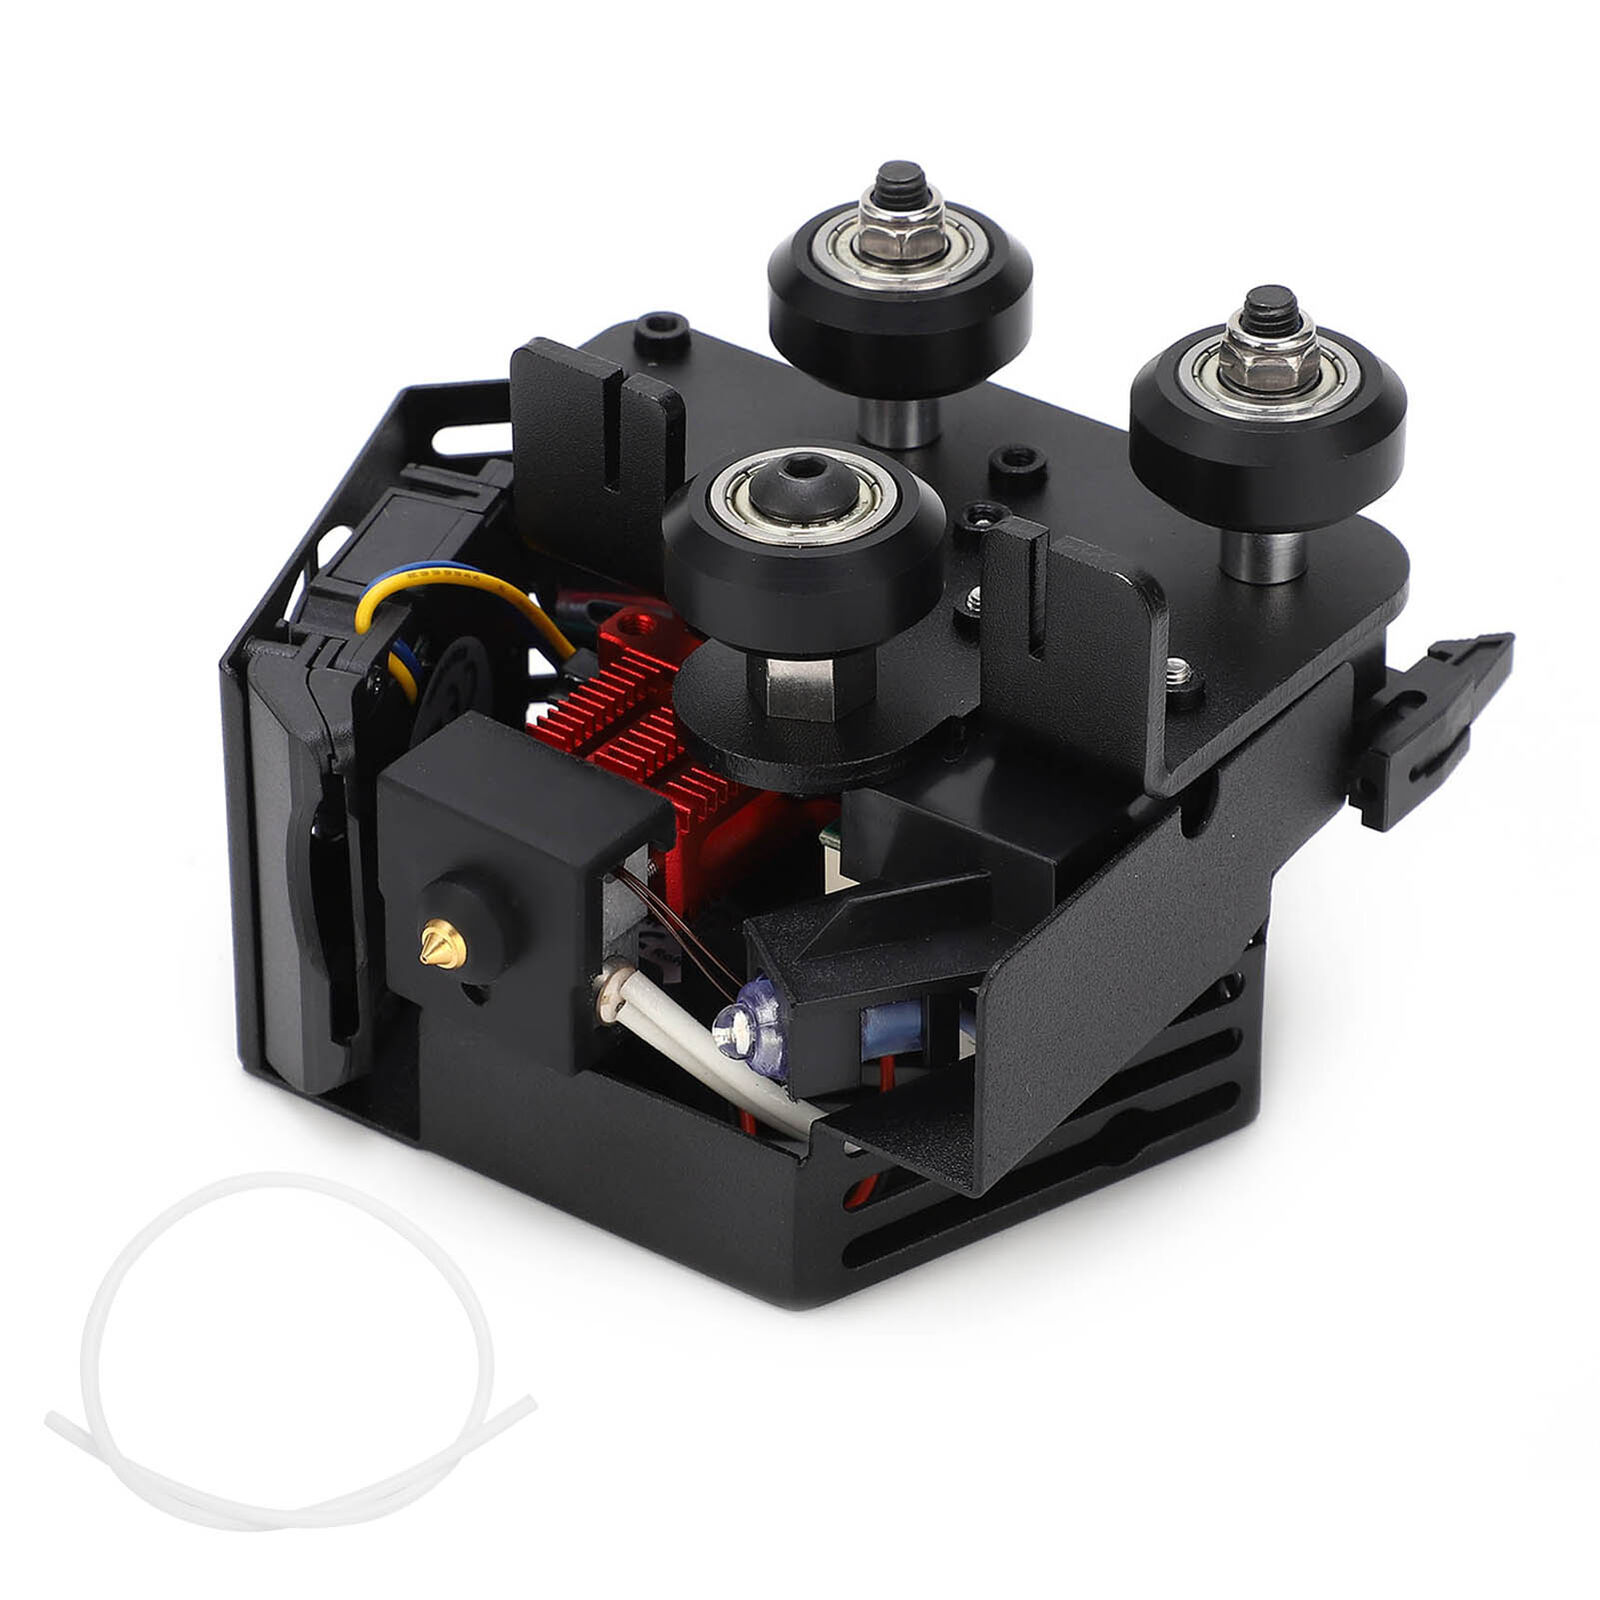 Printer Assembled Full Extruded Hotend Kit With 0.4mm Nozzle For CR-6 SE